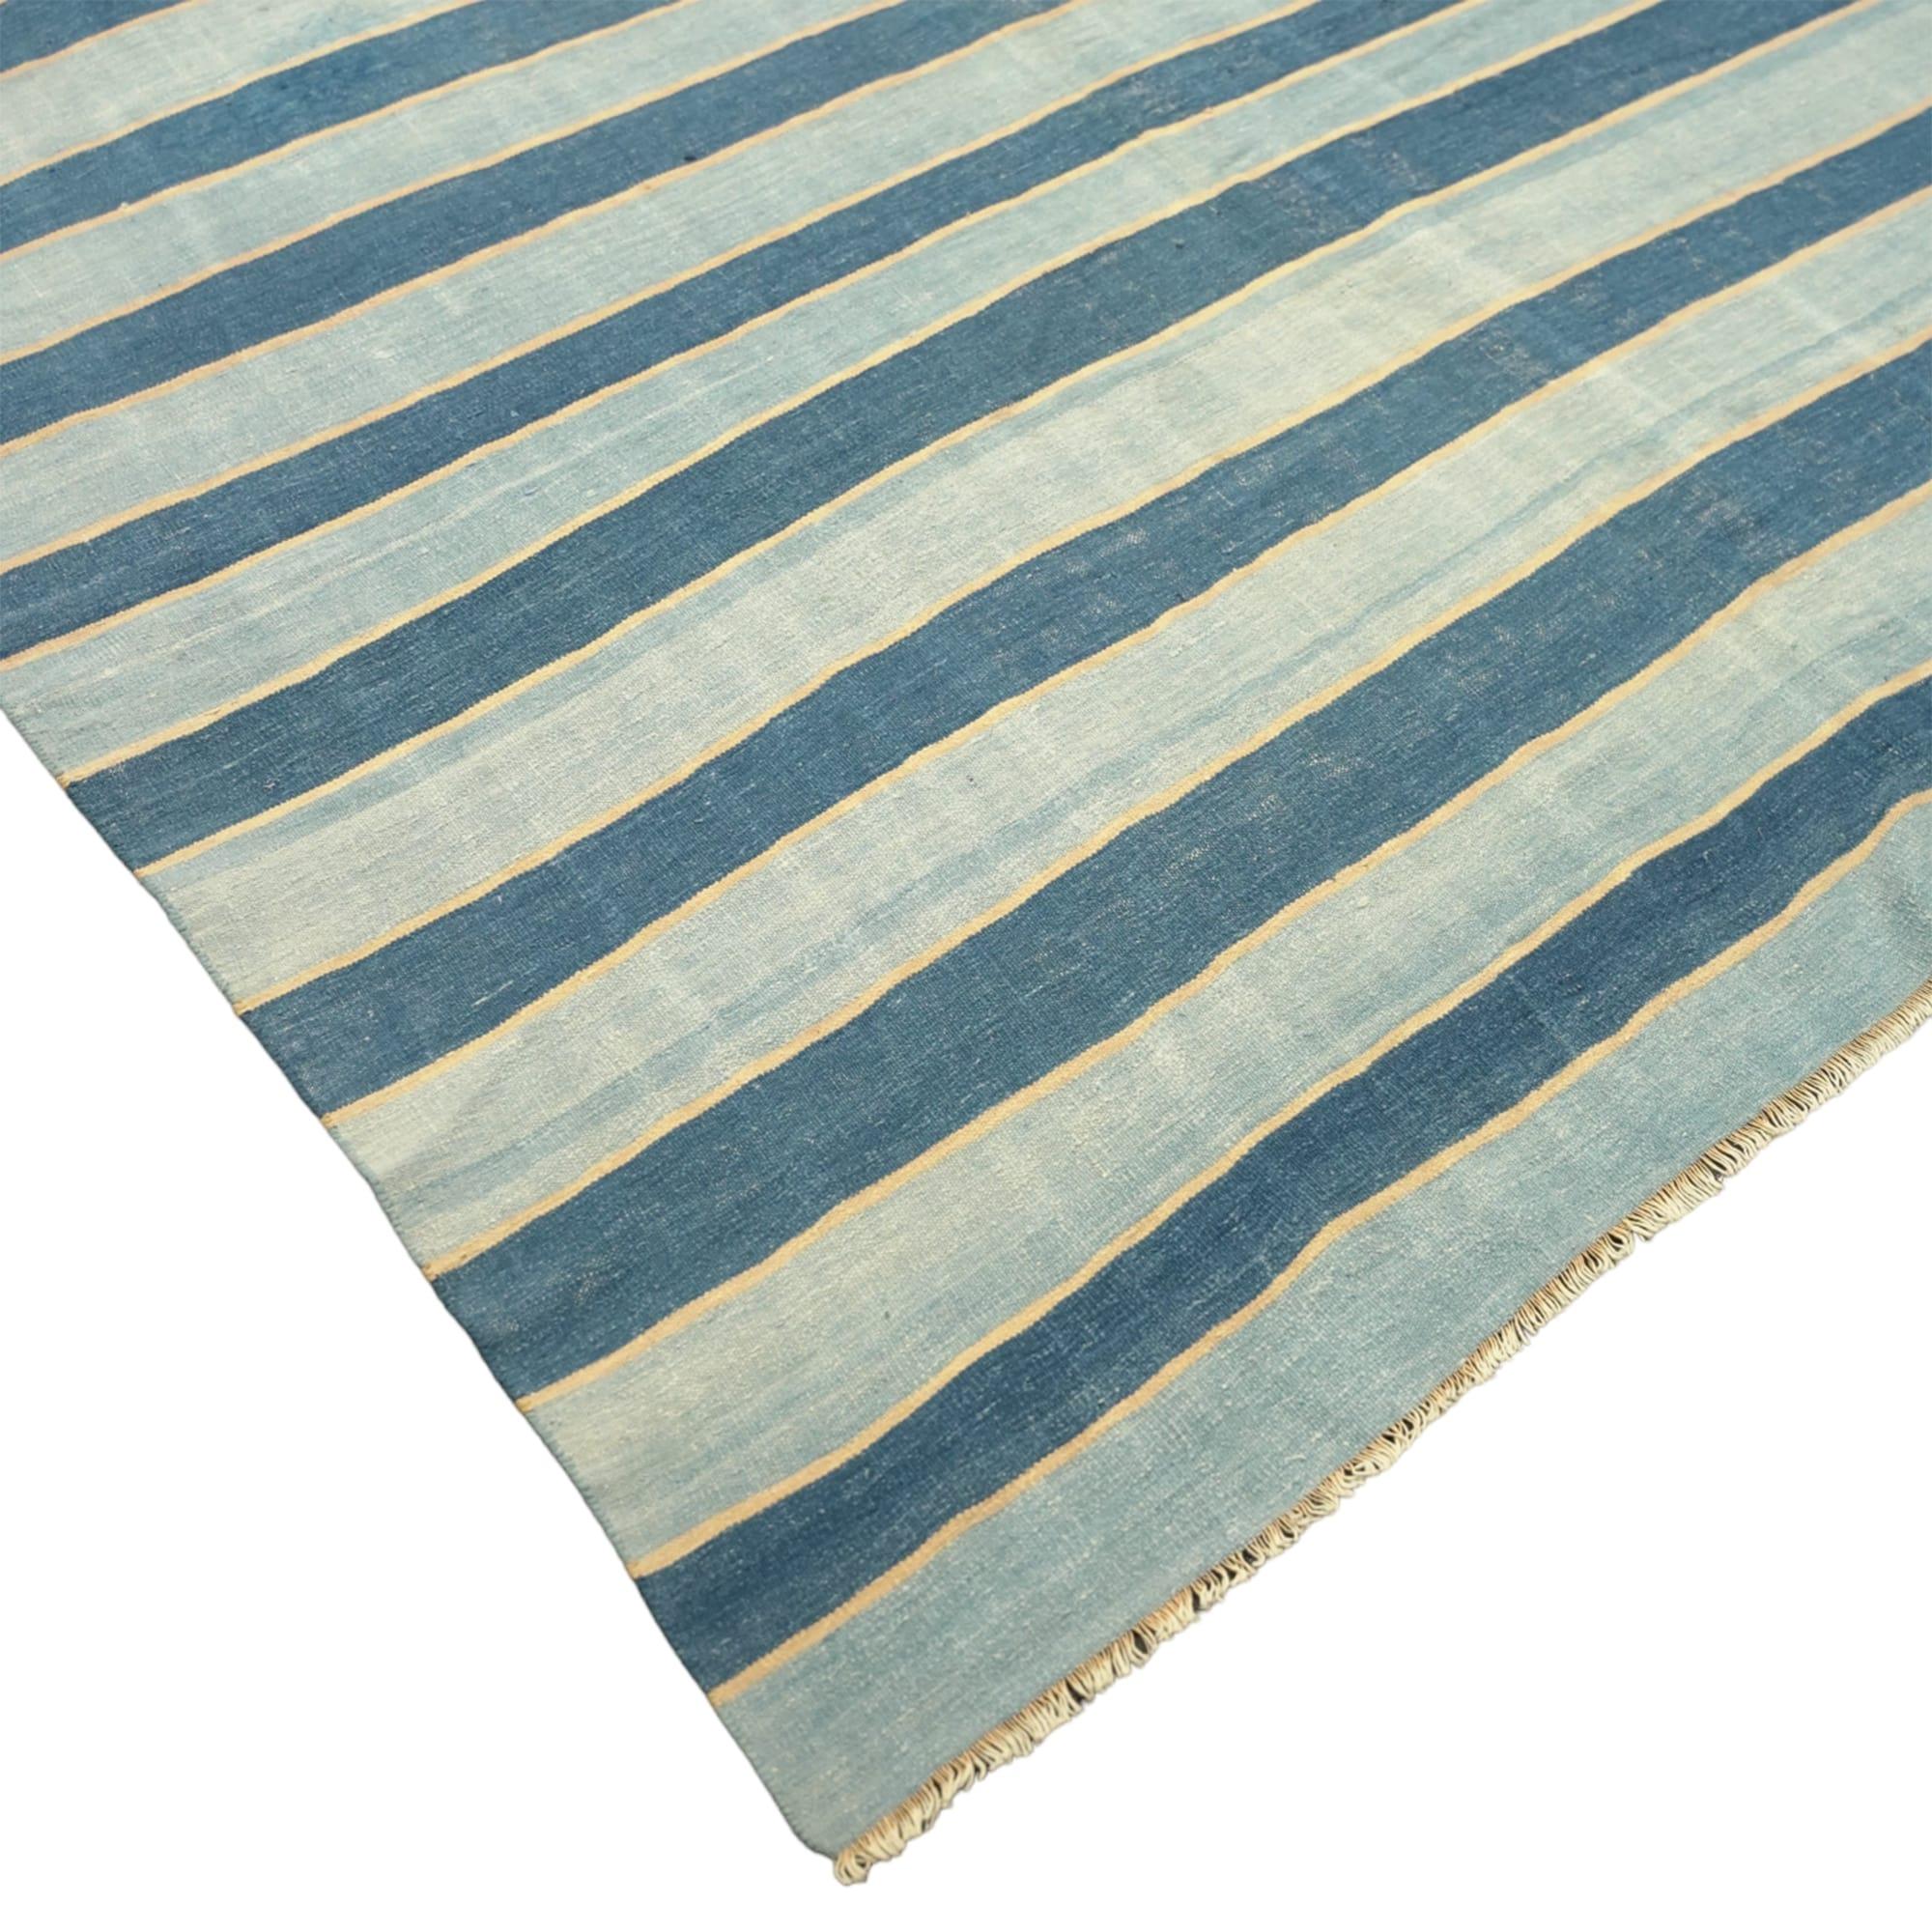 Indian Vintage Dhurrie Rug, with Blue Stripes, from Rug & Kilim For Sale